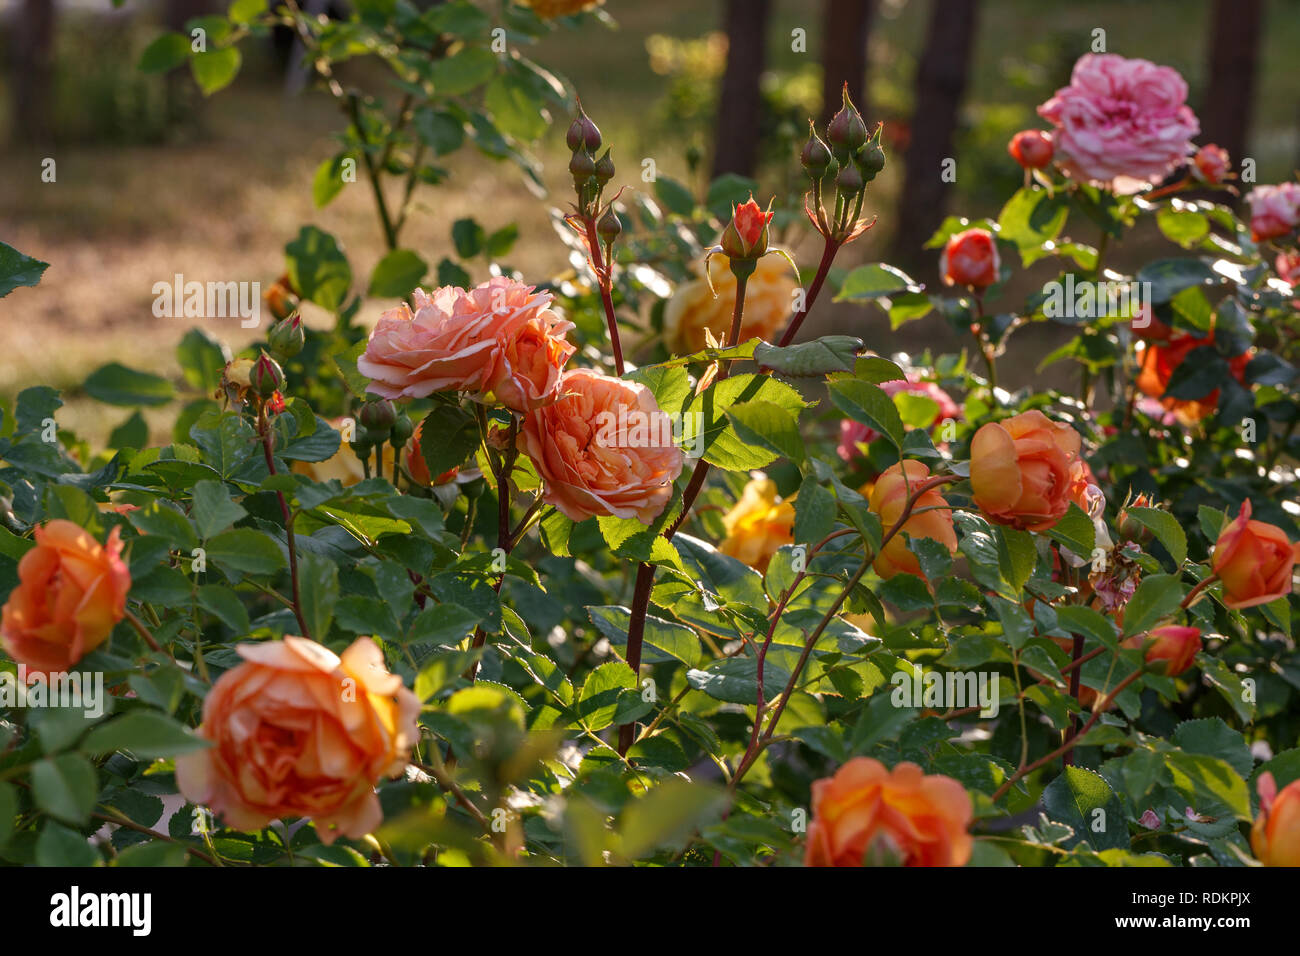 Blooming yellow rose in the garden on a sunny day. Stock Photo